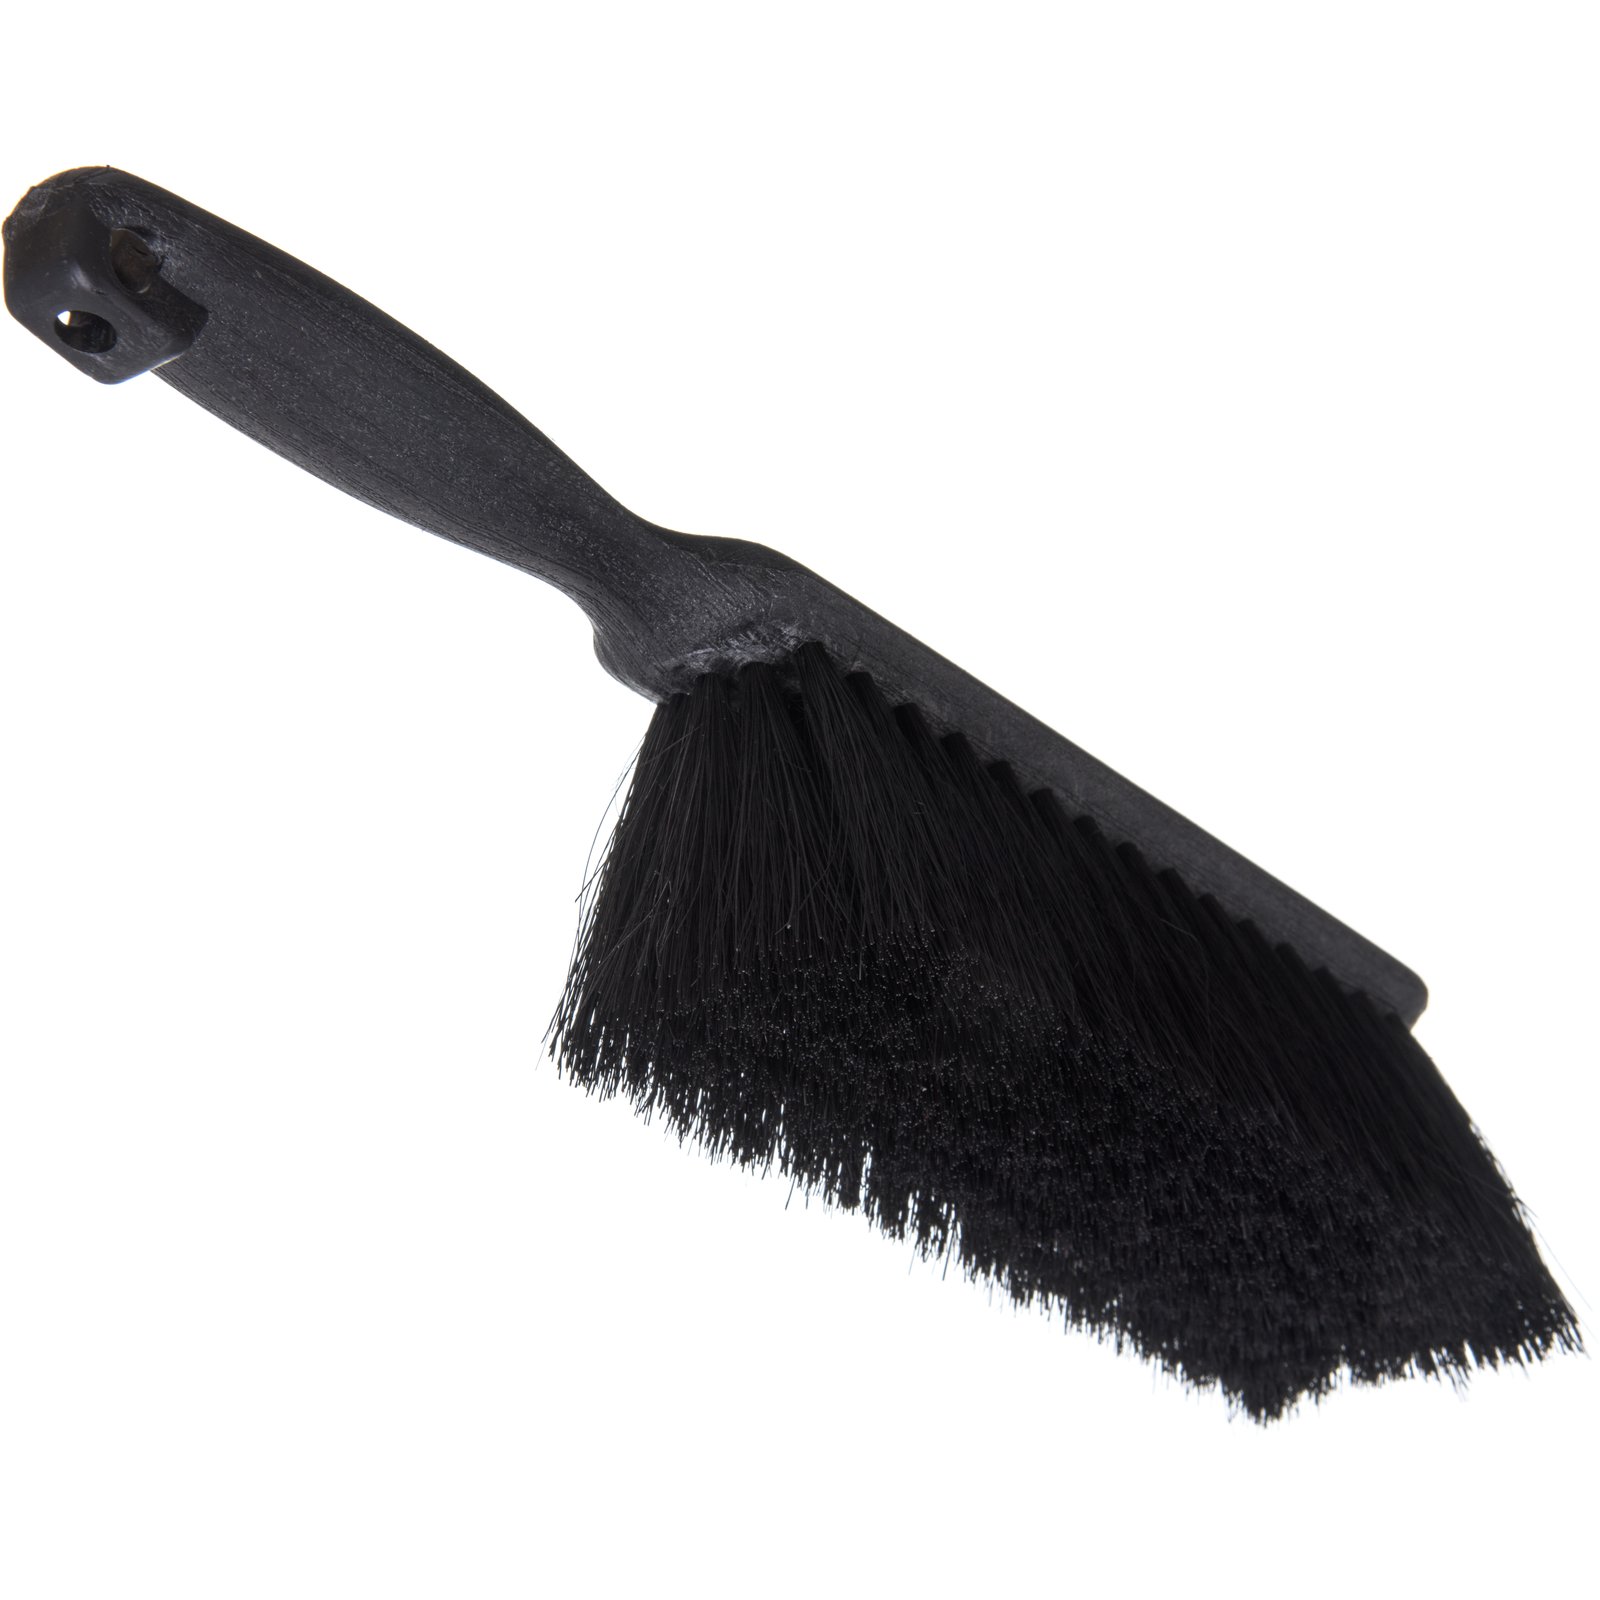 Marko, Inc. - Janitorial Supplies Online > Brushes & Sponges > Counter  Duster Foxtail Bench Brush (Silver Gray Bristle)